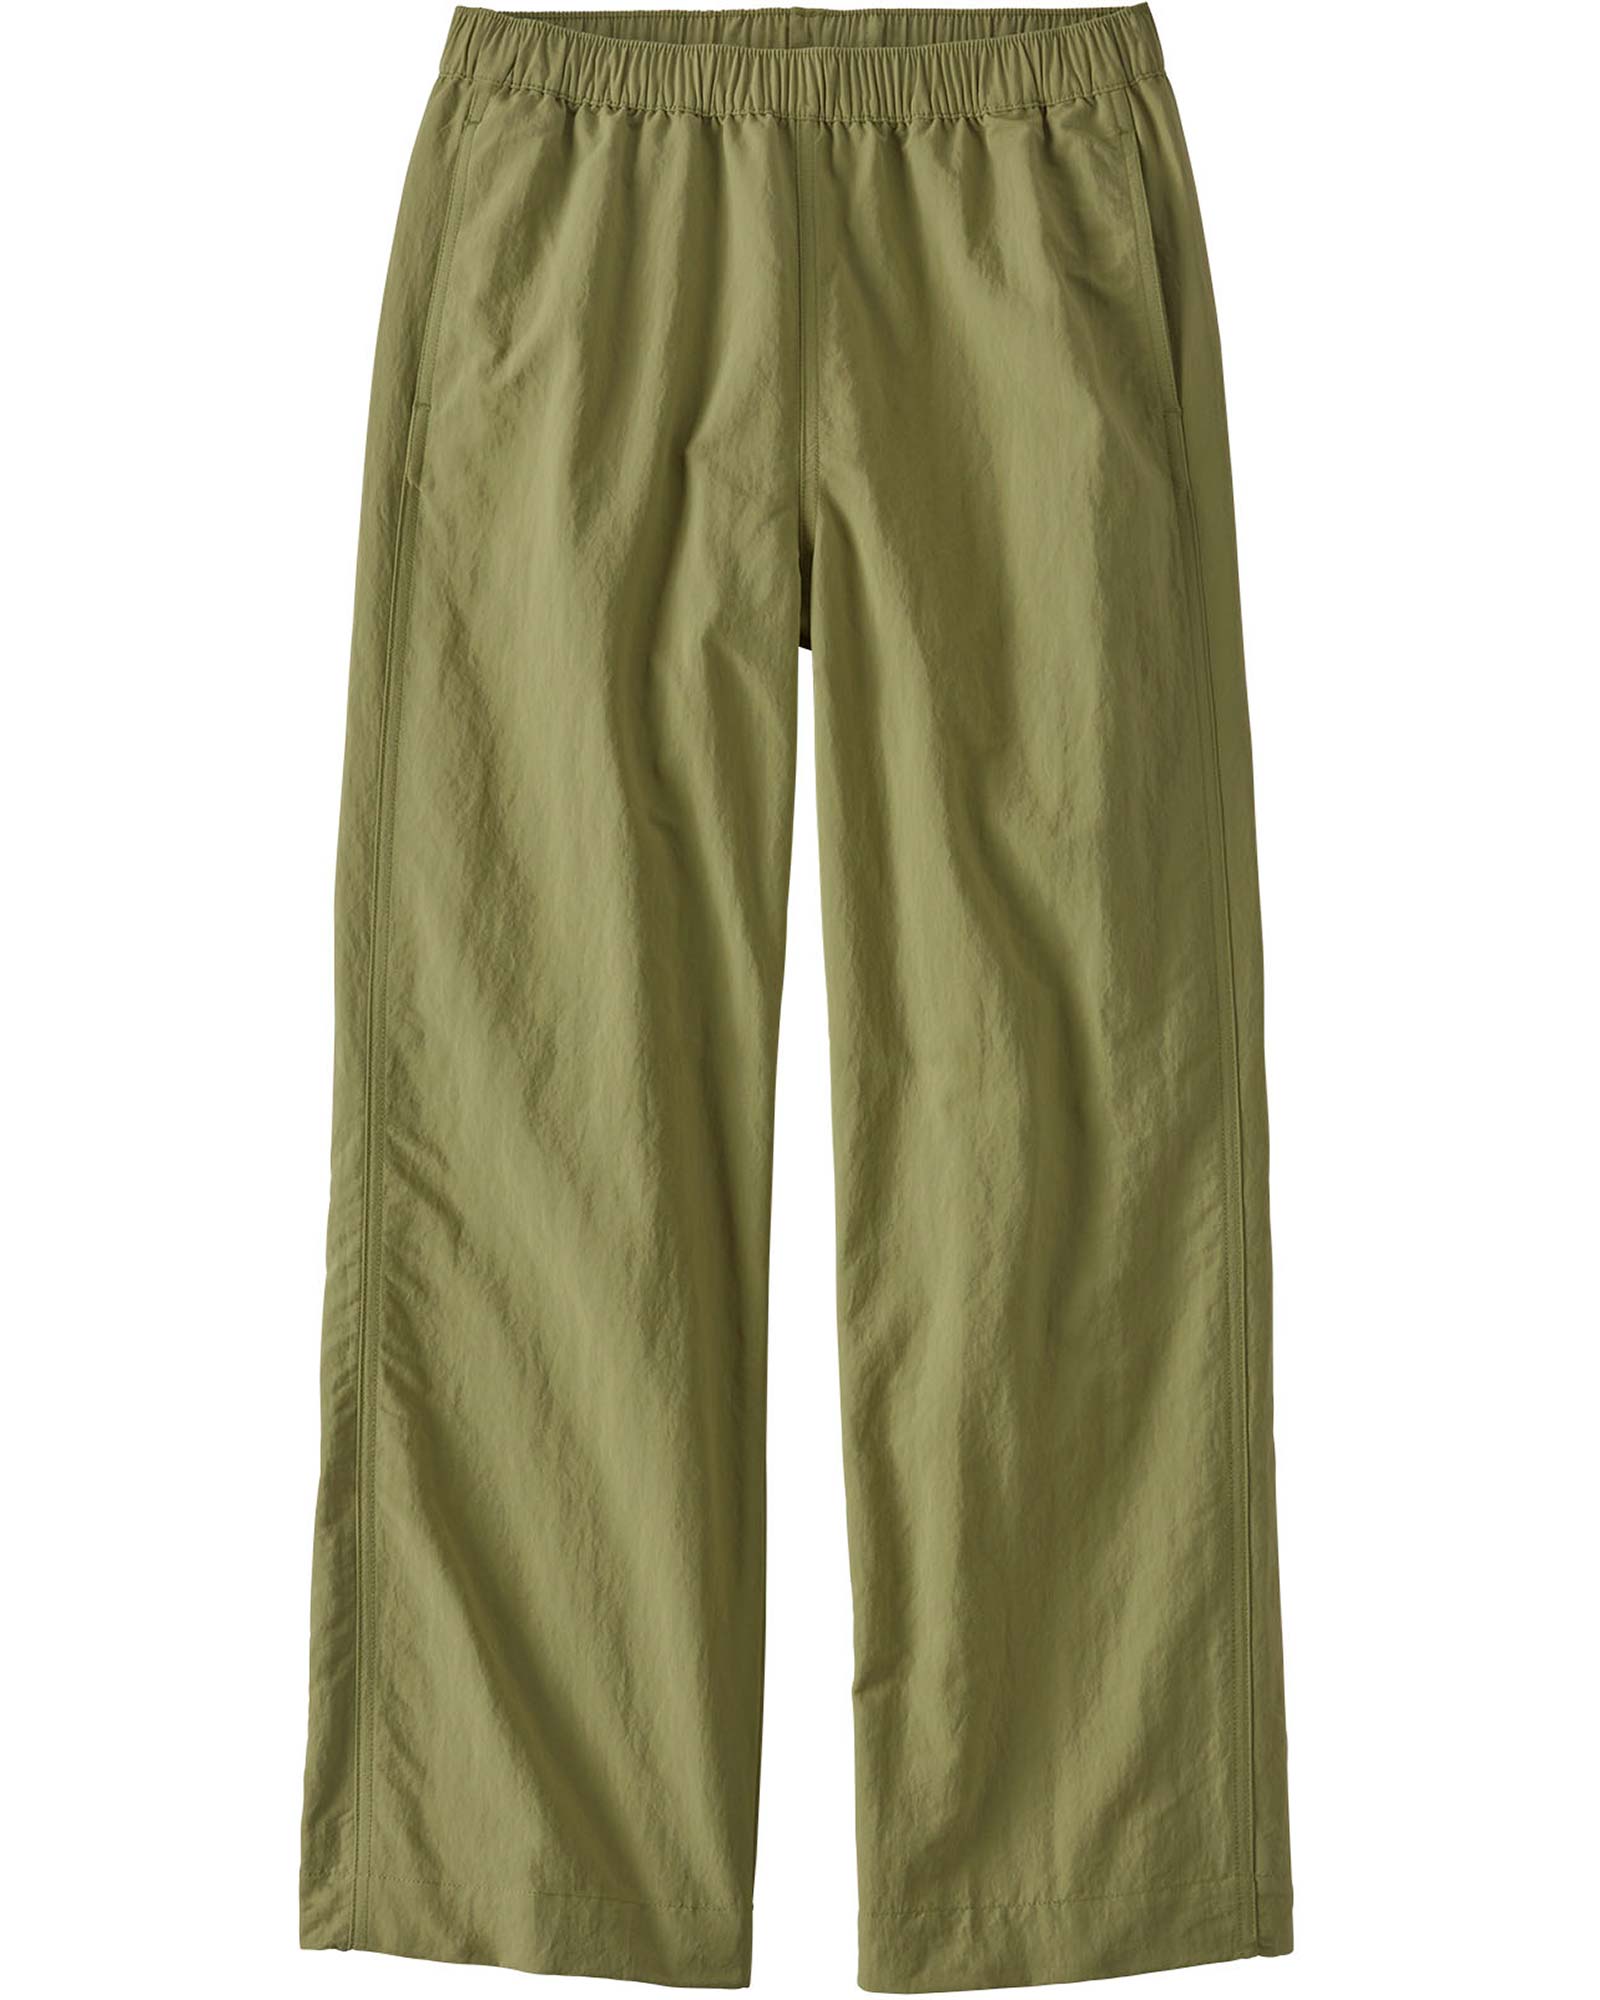 Patagonia Women's Outdoor Everyday Trousers